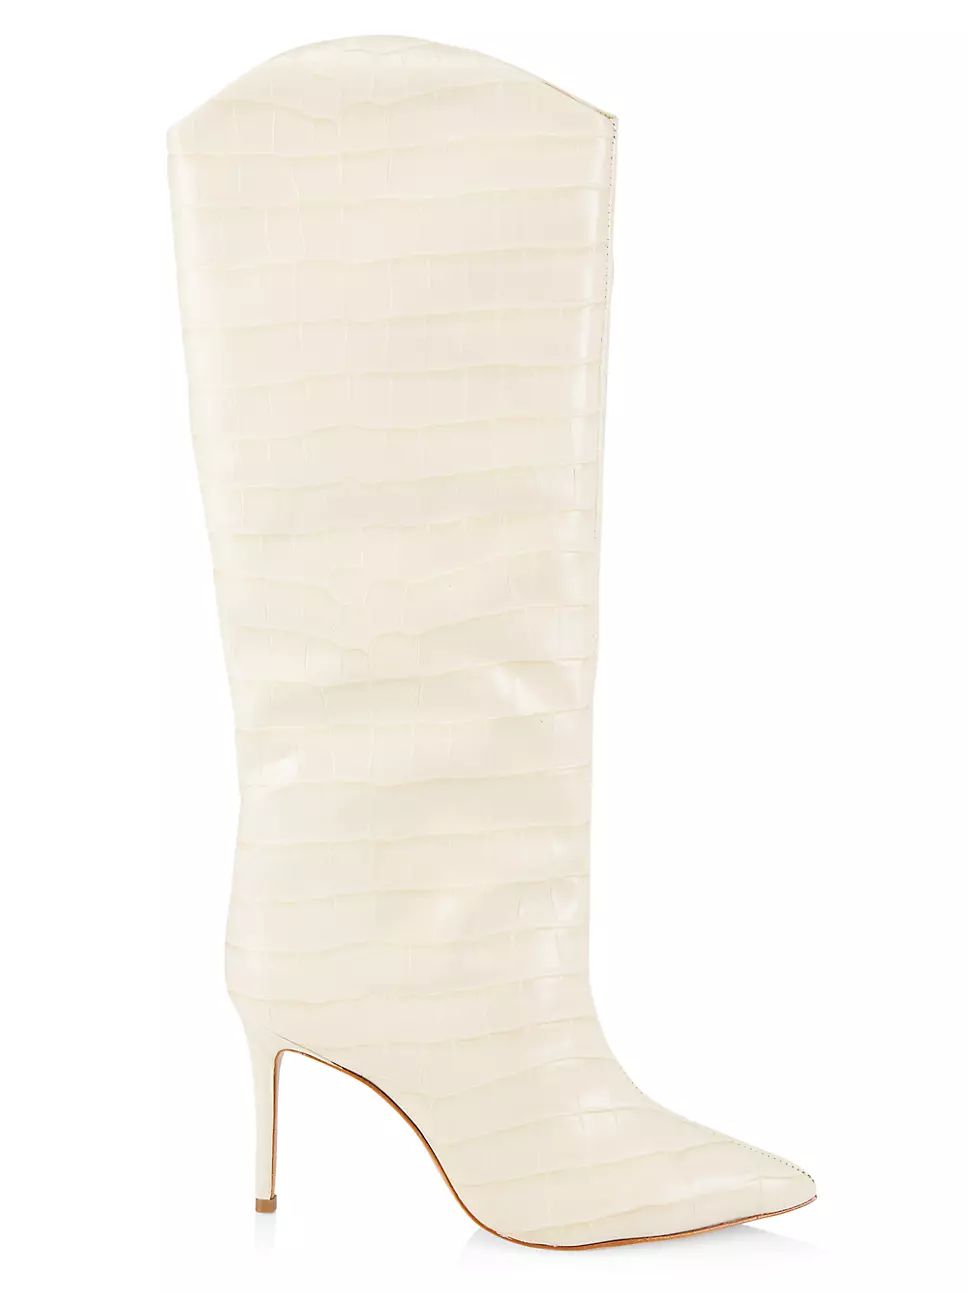 Maryana Croc-Embossed Leather Tall Boots | Saks Fifth Avenue